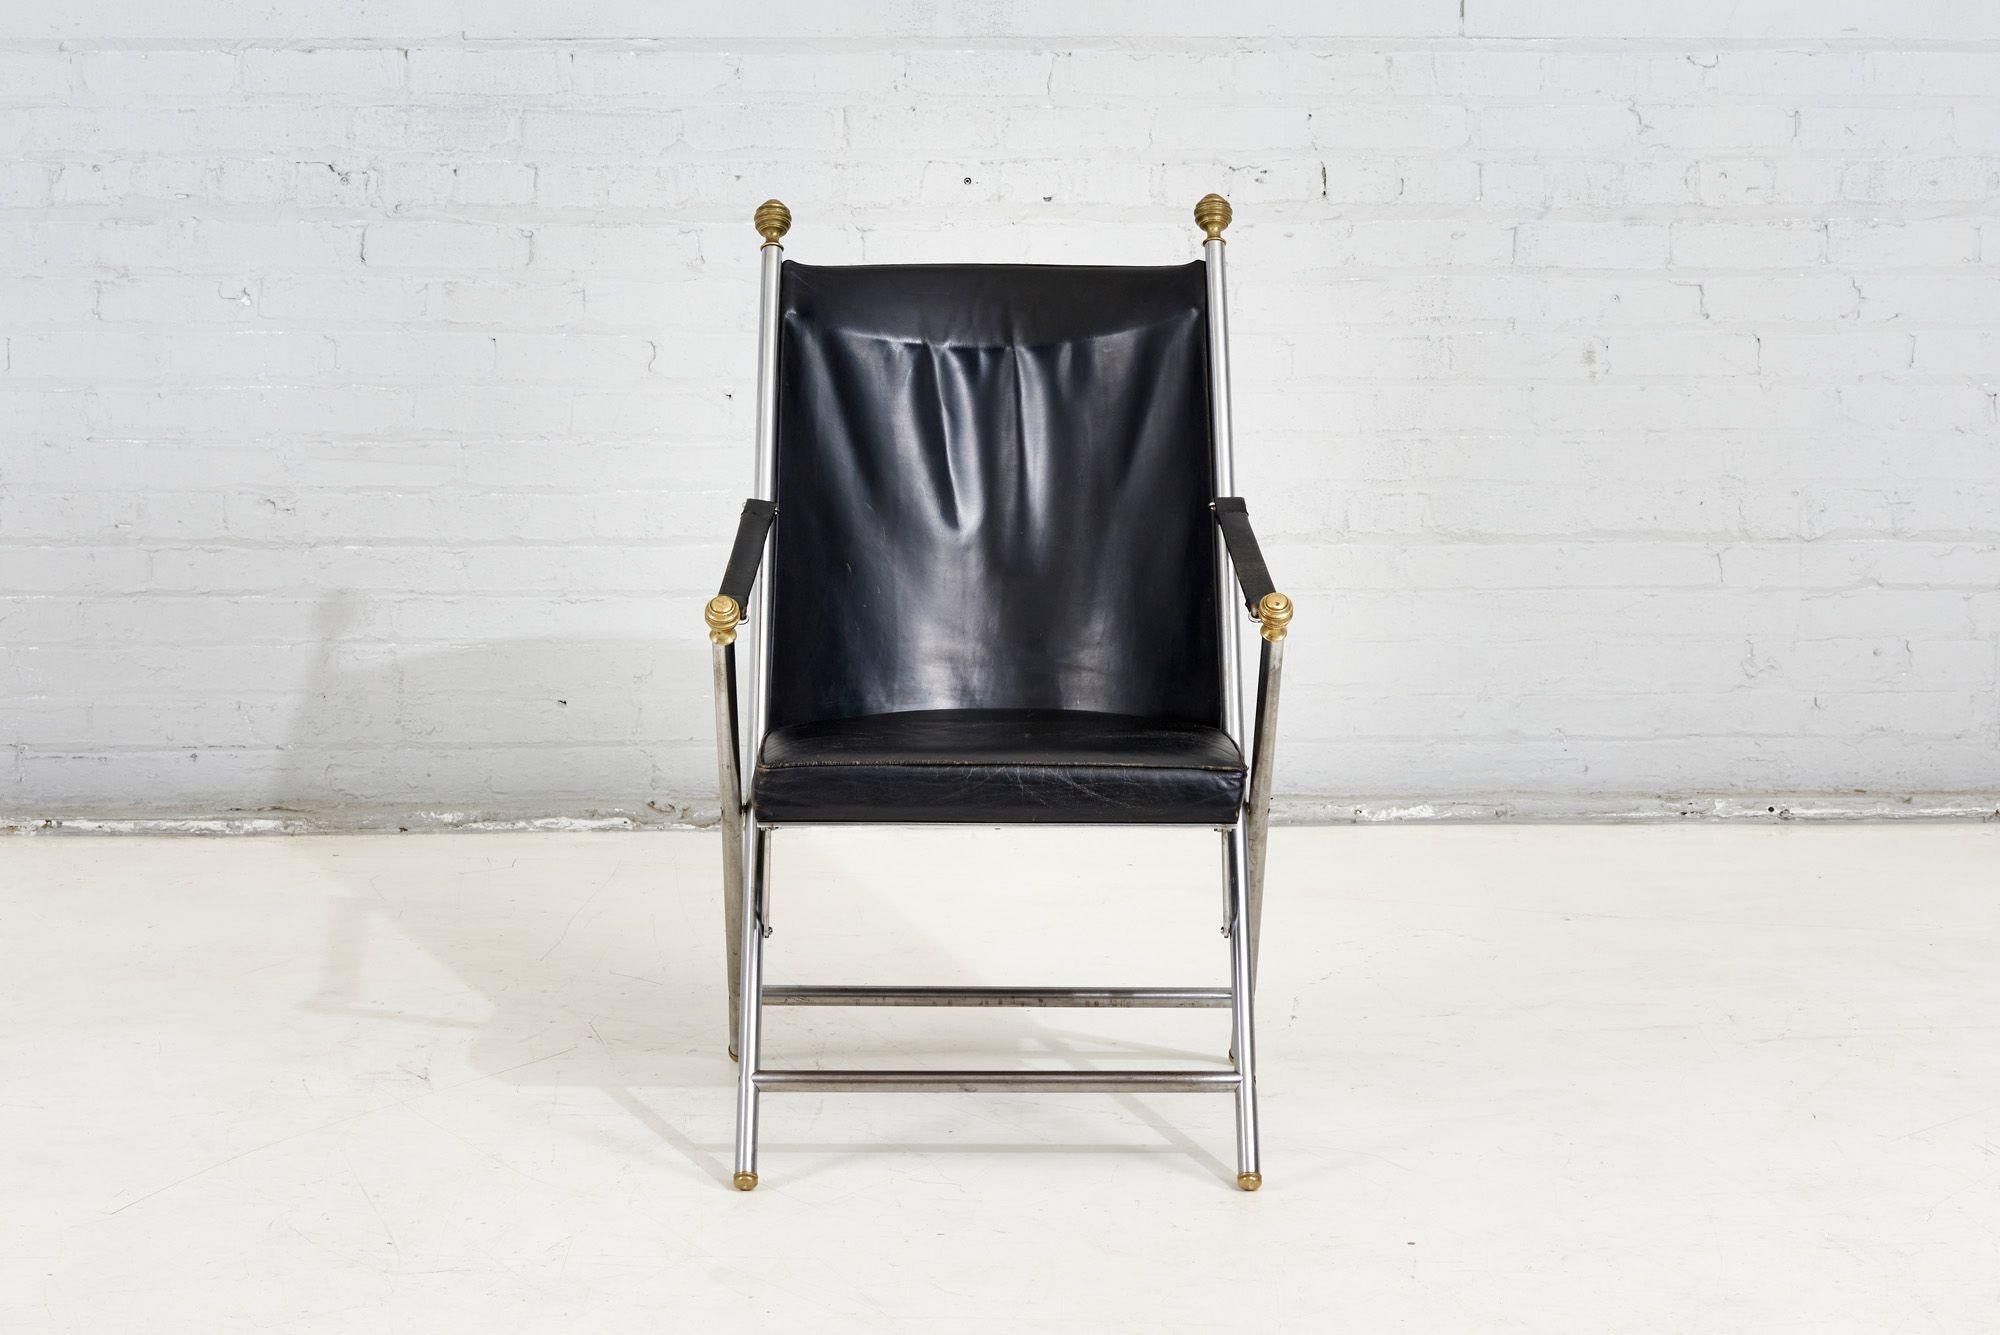 Pair Leather Campaign Folding Chairs by Maison Jansen, 1960.  Original leather.  One chair has a scratch on the leather in the back.

